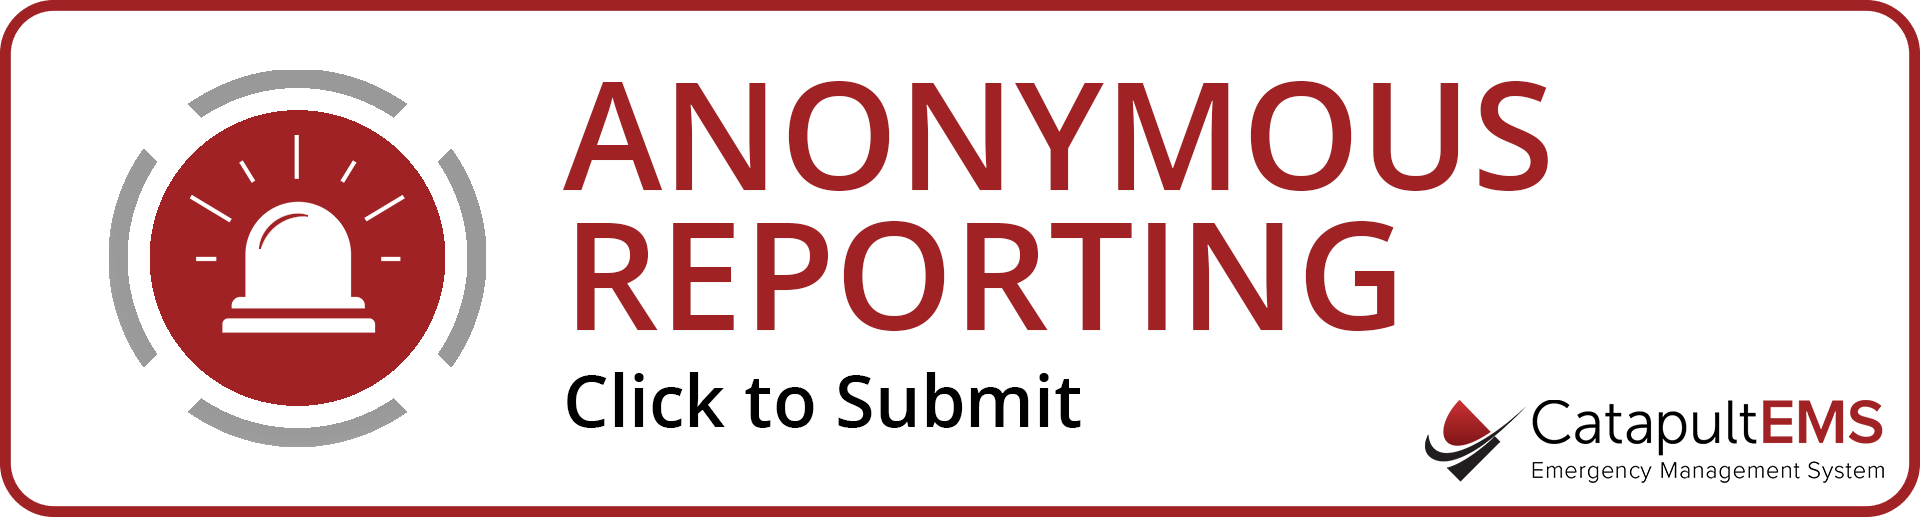 Anonymous Reporting Click To Submit. CatapultEMS.